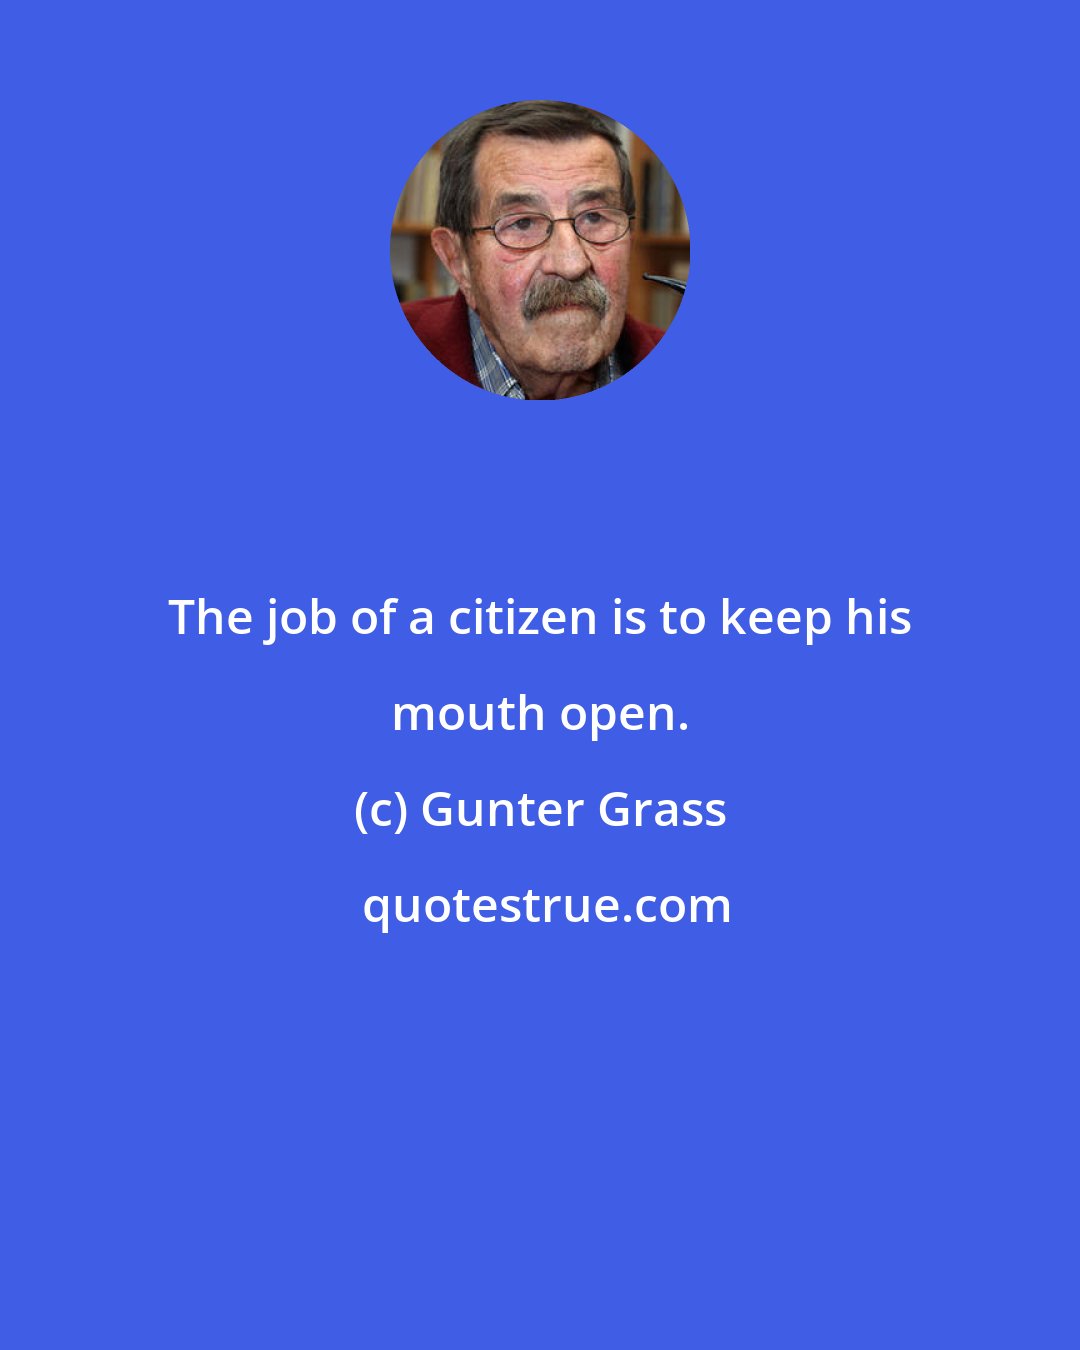 Gunter Grass: The job of a citizen is to keep his mouth open.